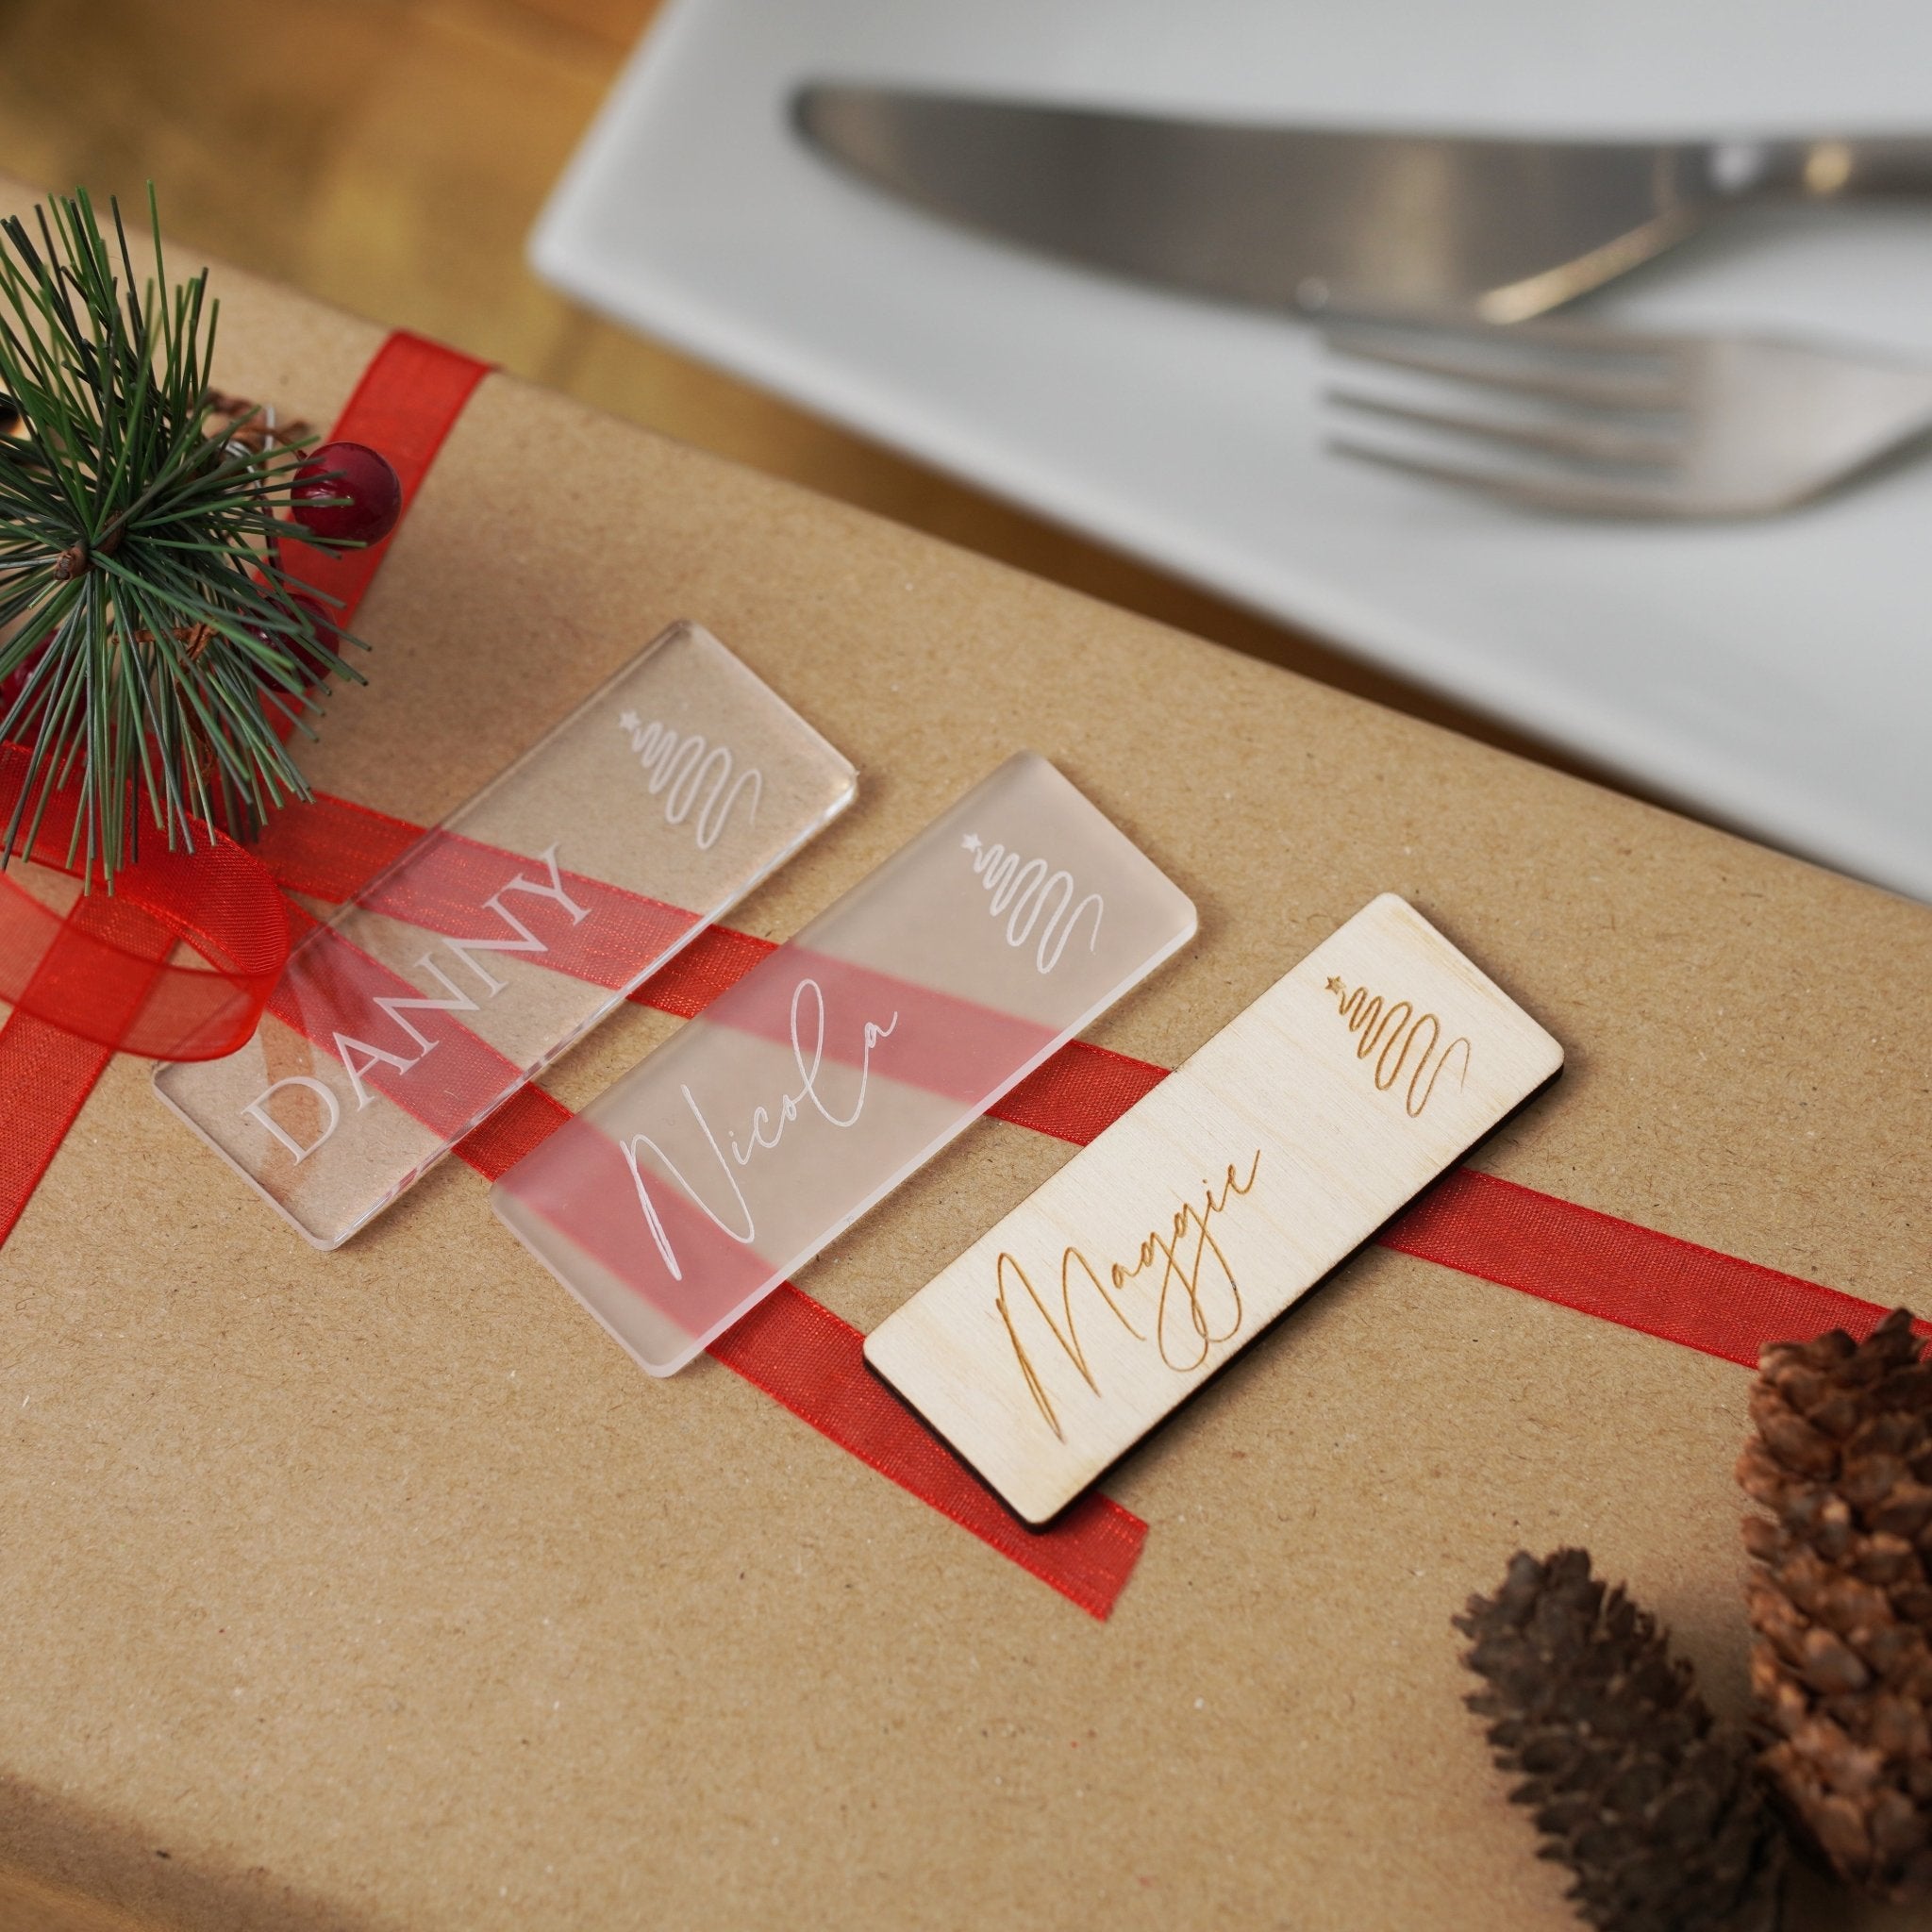 Personalised Christmas place settings